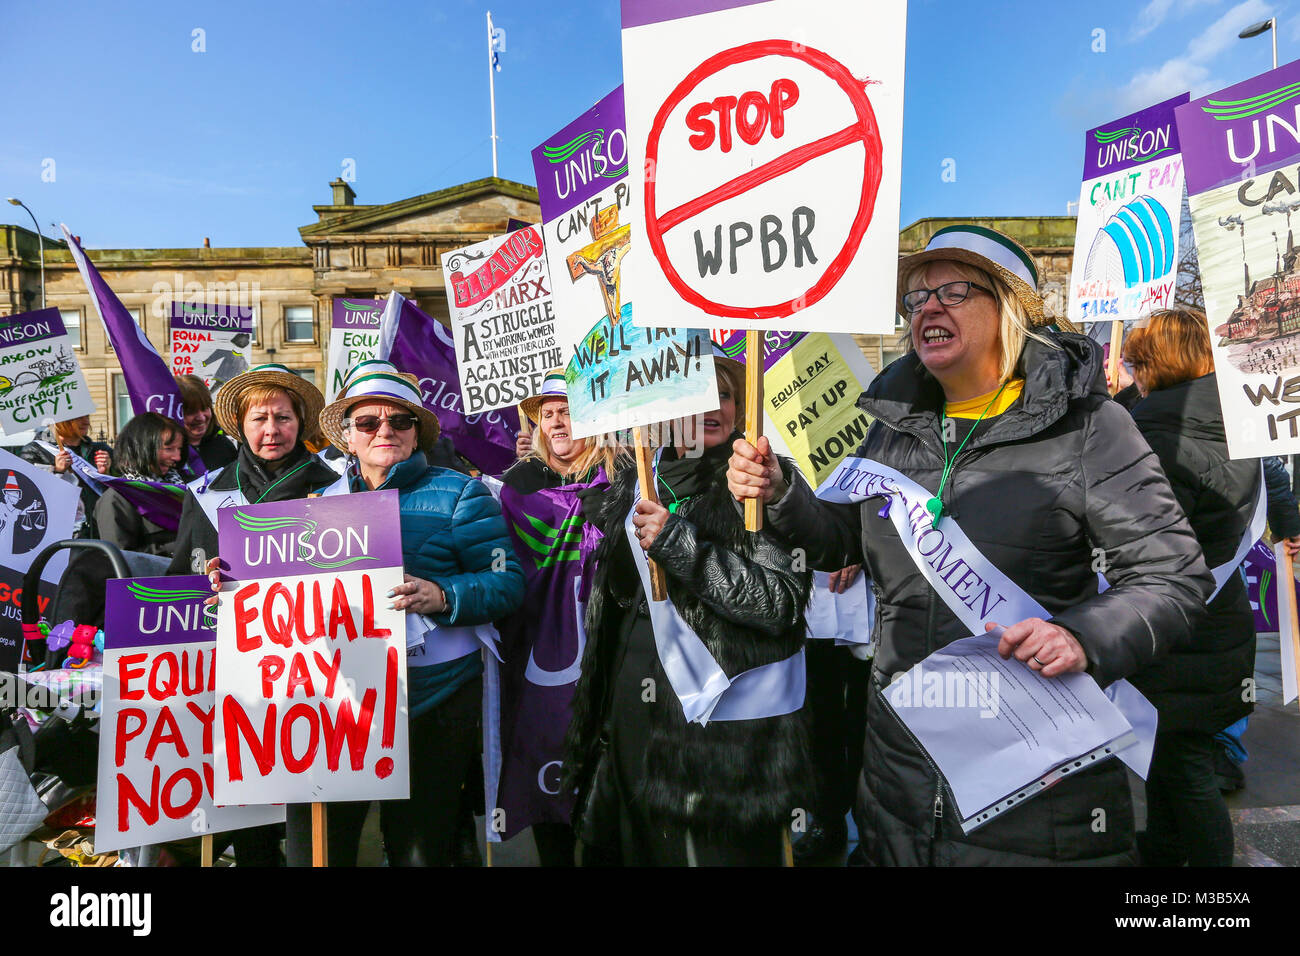 Glasgow, Scotland. 10th February, 2018. Hundreds of women, supported by the Trades Union UNISON, took part in a protest march from Glasgow Green to George Square in an effort to put pressure on Glasgow City Council and get them to honour their pledge to settle a long running dispute over equal pay. Although Glasgow City Council lost their legal case and agreed to hold negotiations with UNISON and other Trades Unions some months ago many claimants accuse the City Council of procrastination after several months of apparent inaction. Credit: Findlay/Alamy Live News Stock Photo